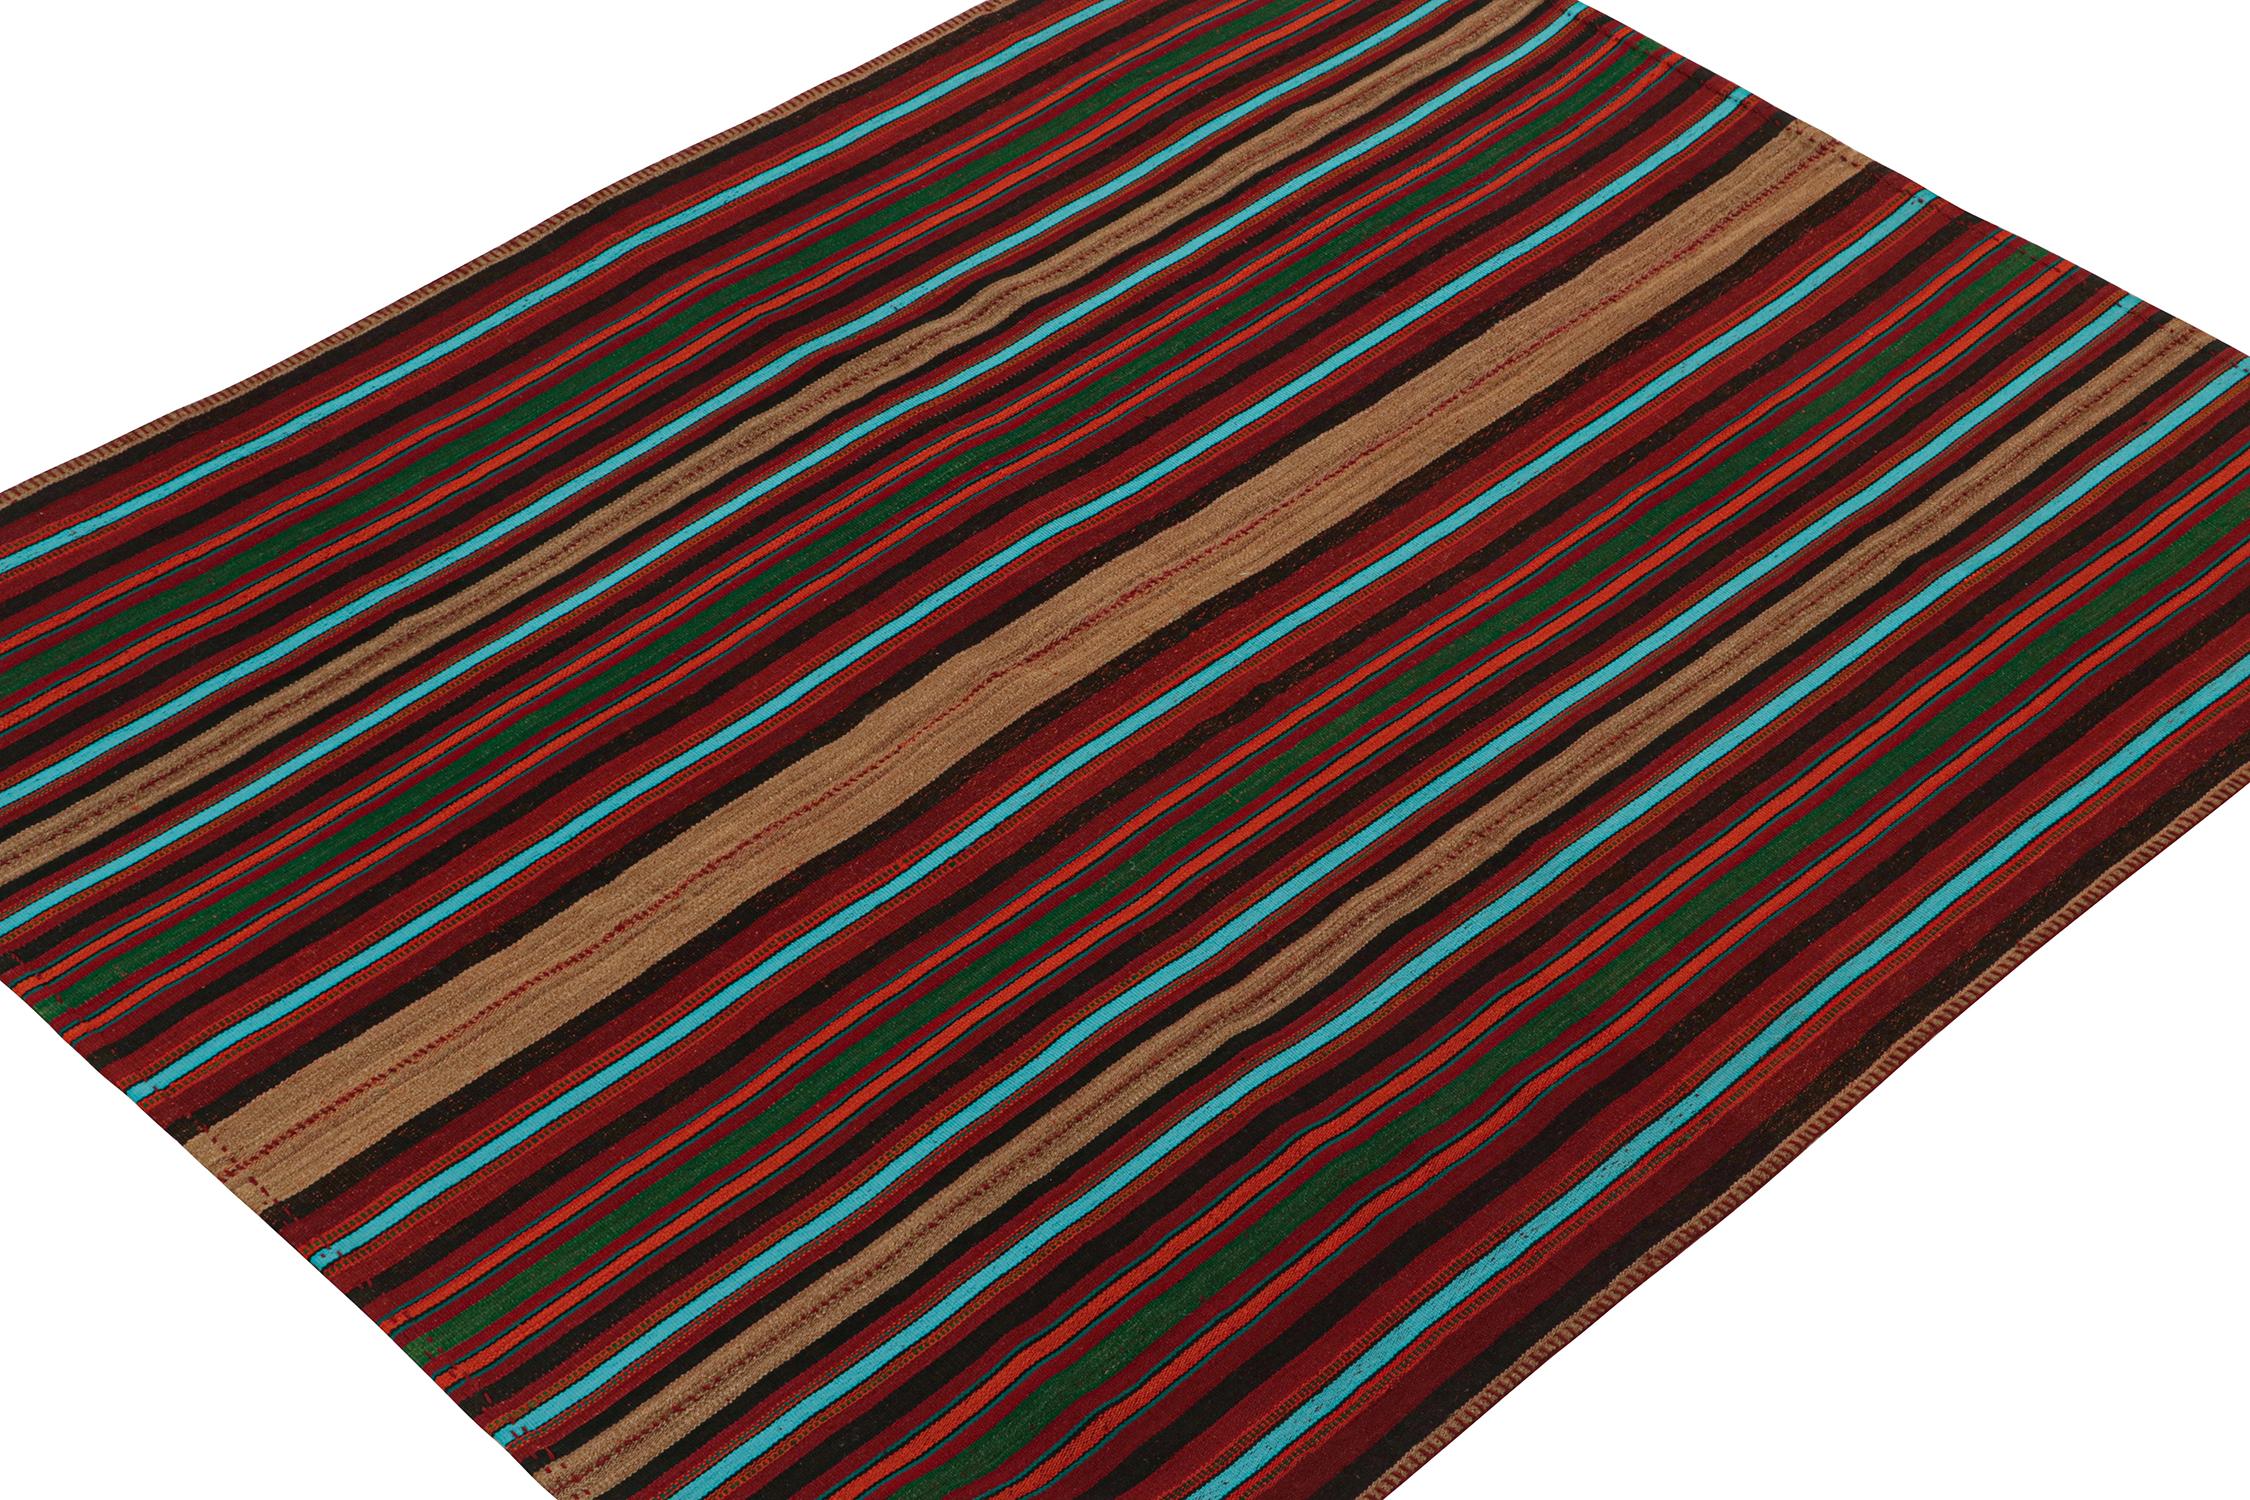 This vintage 6 x 7 Persian kilim is a mid-century tribal rug, handwoven in wool circa 1950-1960.

The design enjoys stripes alternating in tones of bright blue, green, black, and beige-brown on a burgundy red base. Its technique, connoisseurs will